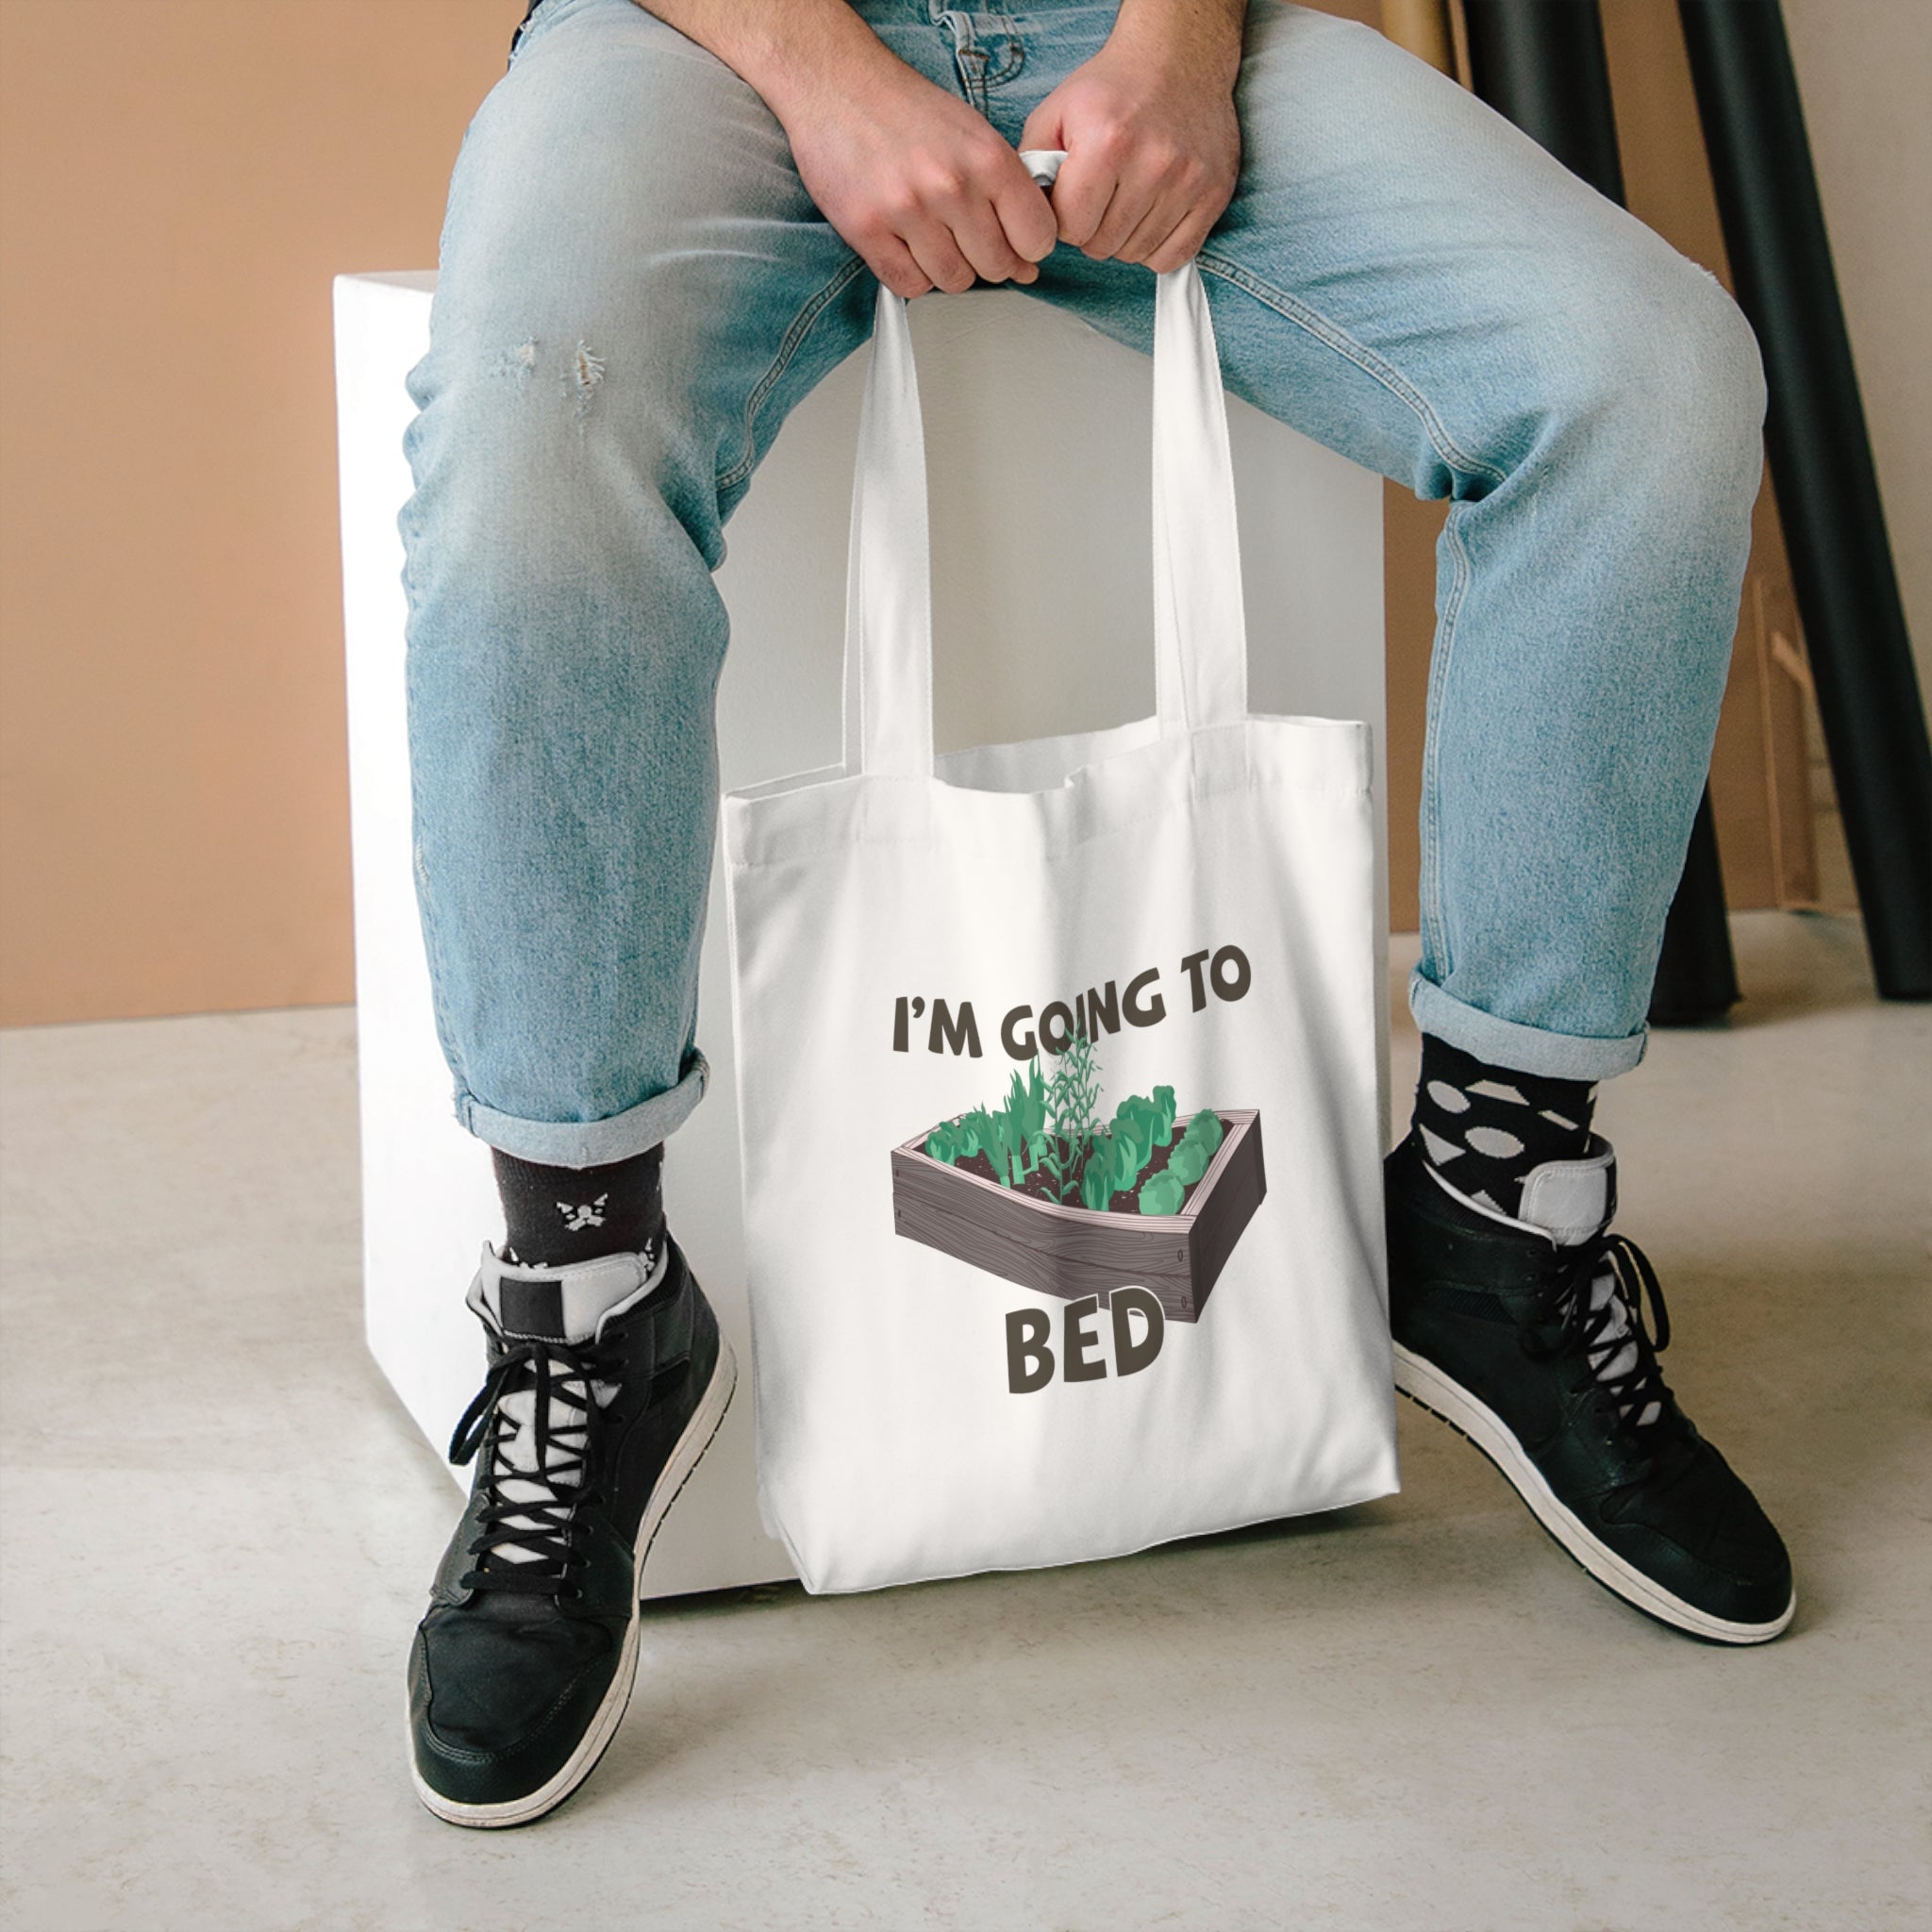 AUS I'm Going to Bed (wood) Canvas Tote Bag